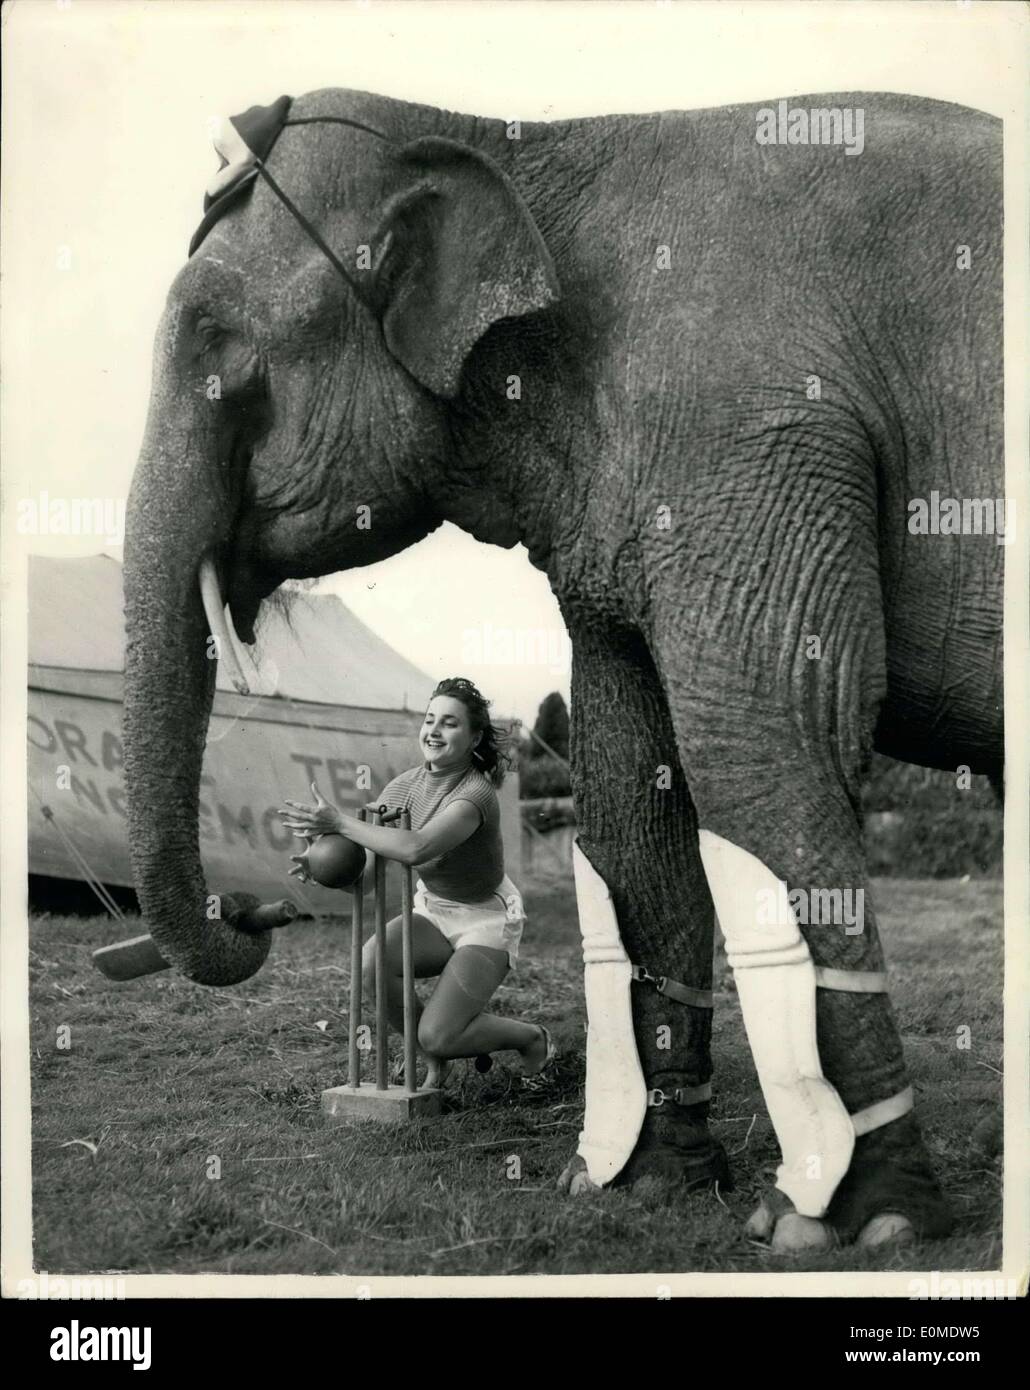 Sep. 22, 1954 - Jenny just misses a six. The cricketing star of the Mills Circus.: An elephant never forgets even though she does miss the ball sometimes. This is Jenny the famous Bertram Mills Cricketing elephant now on a visit to Bournemouth with the rest of her act. Stock Photo